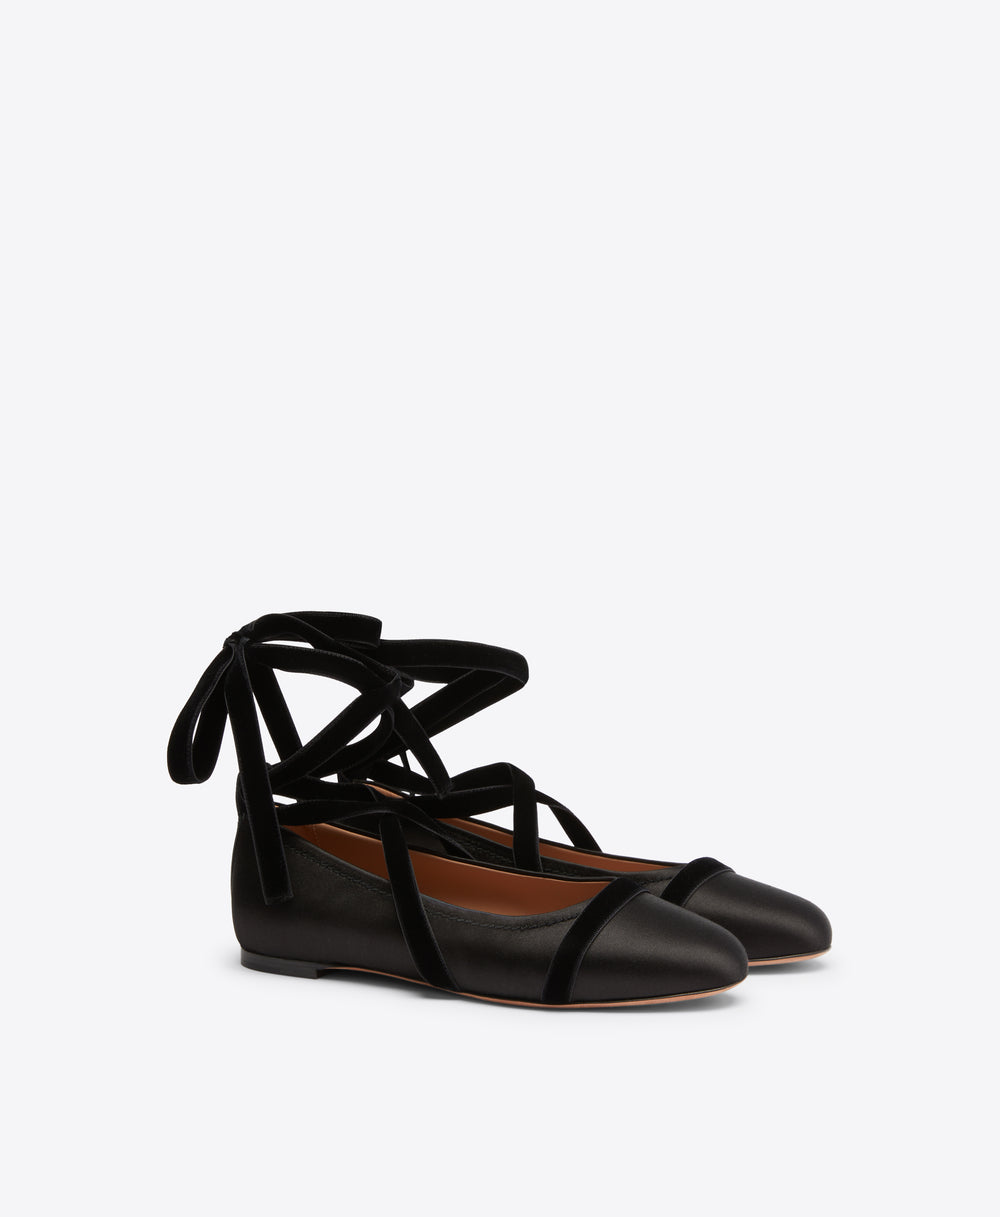 Spencer Black Satin Flats with Velvet Ribbons Malone Souliers